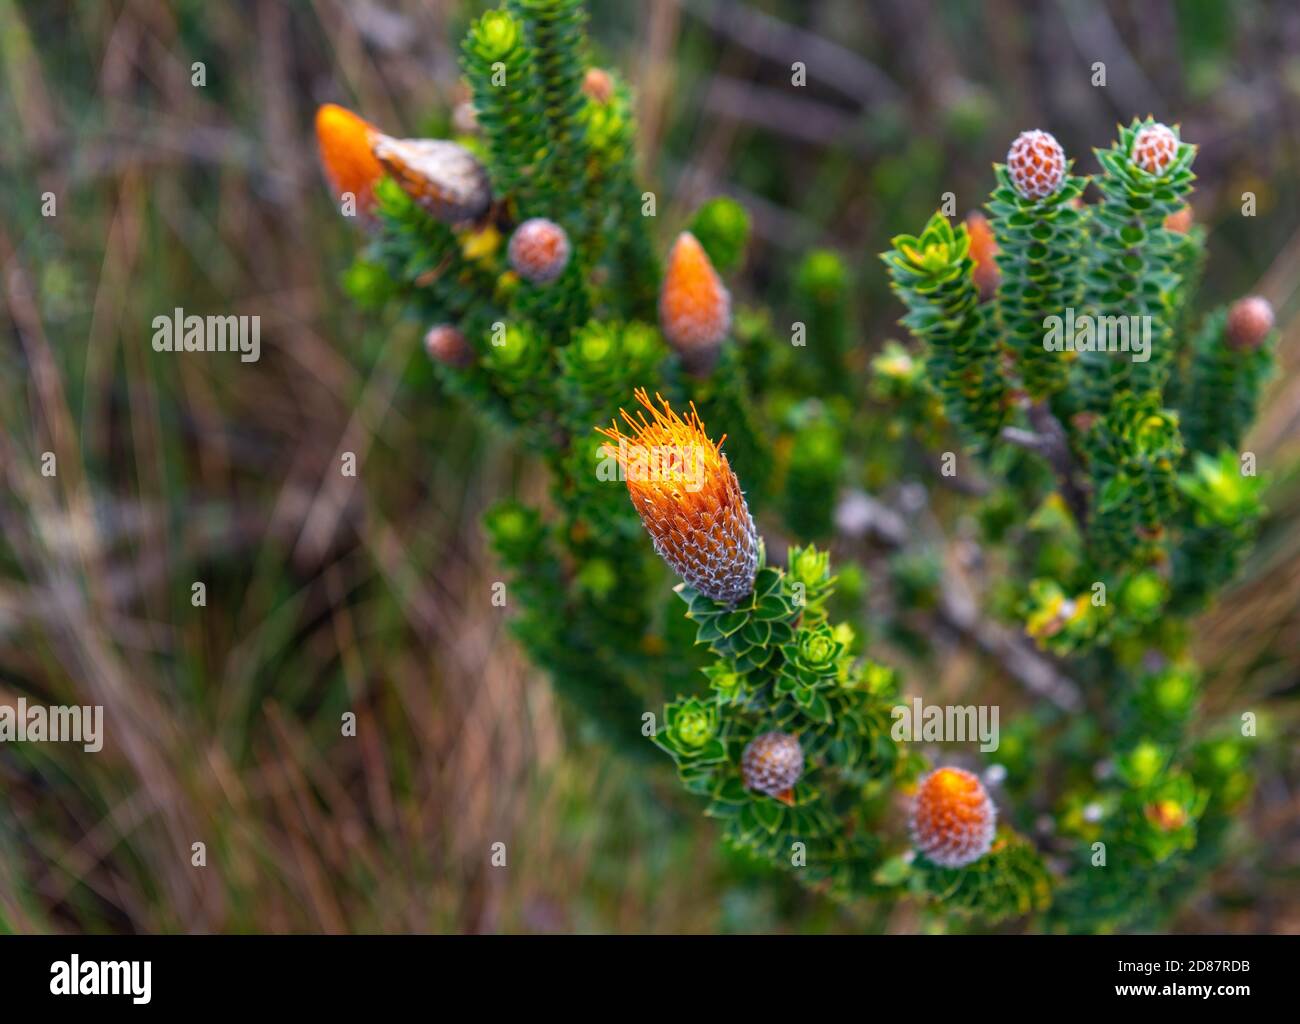 Flower of the Chuquiragua plant (Chuquiraga jussieui), known as the flower of the Andes climber, Ecuador. Stock Photo